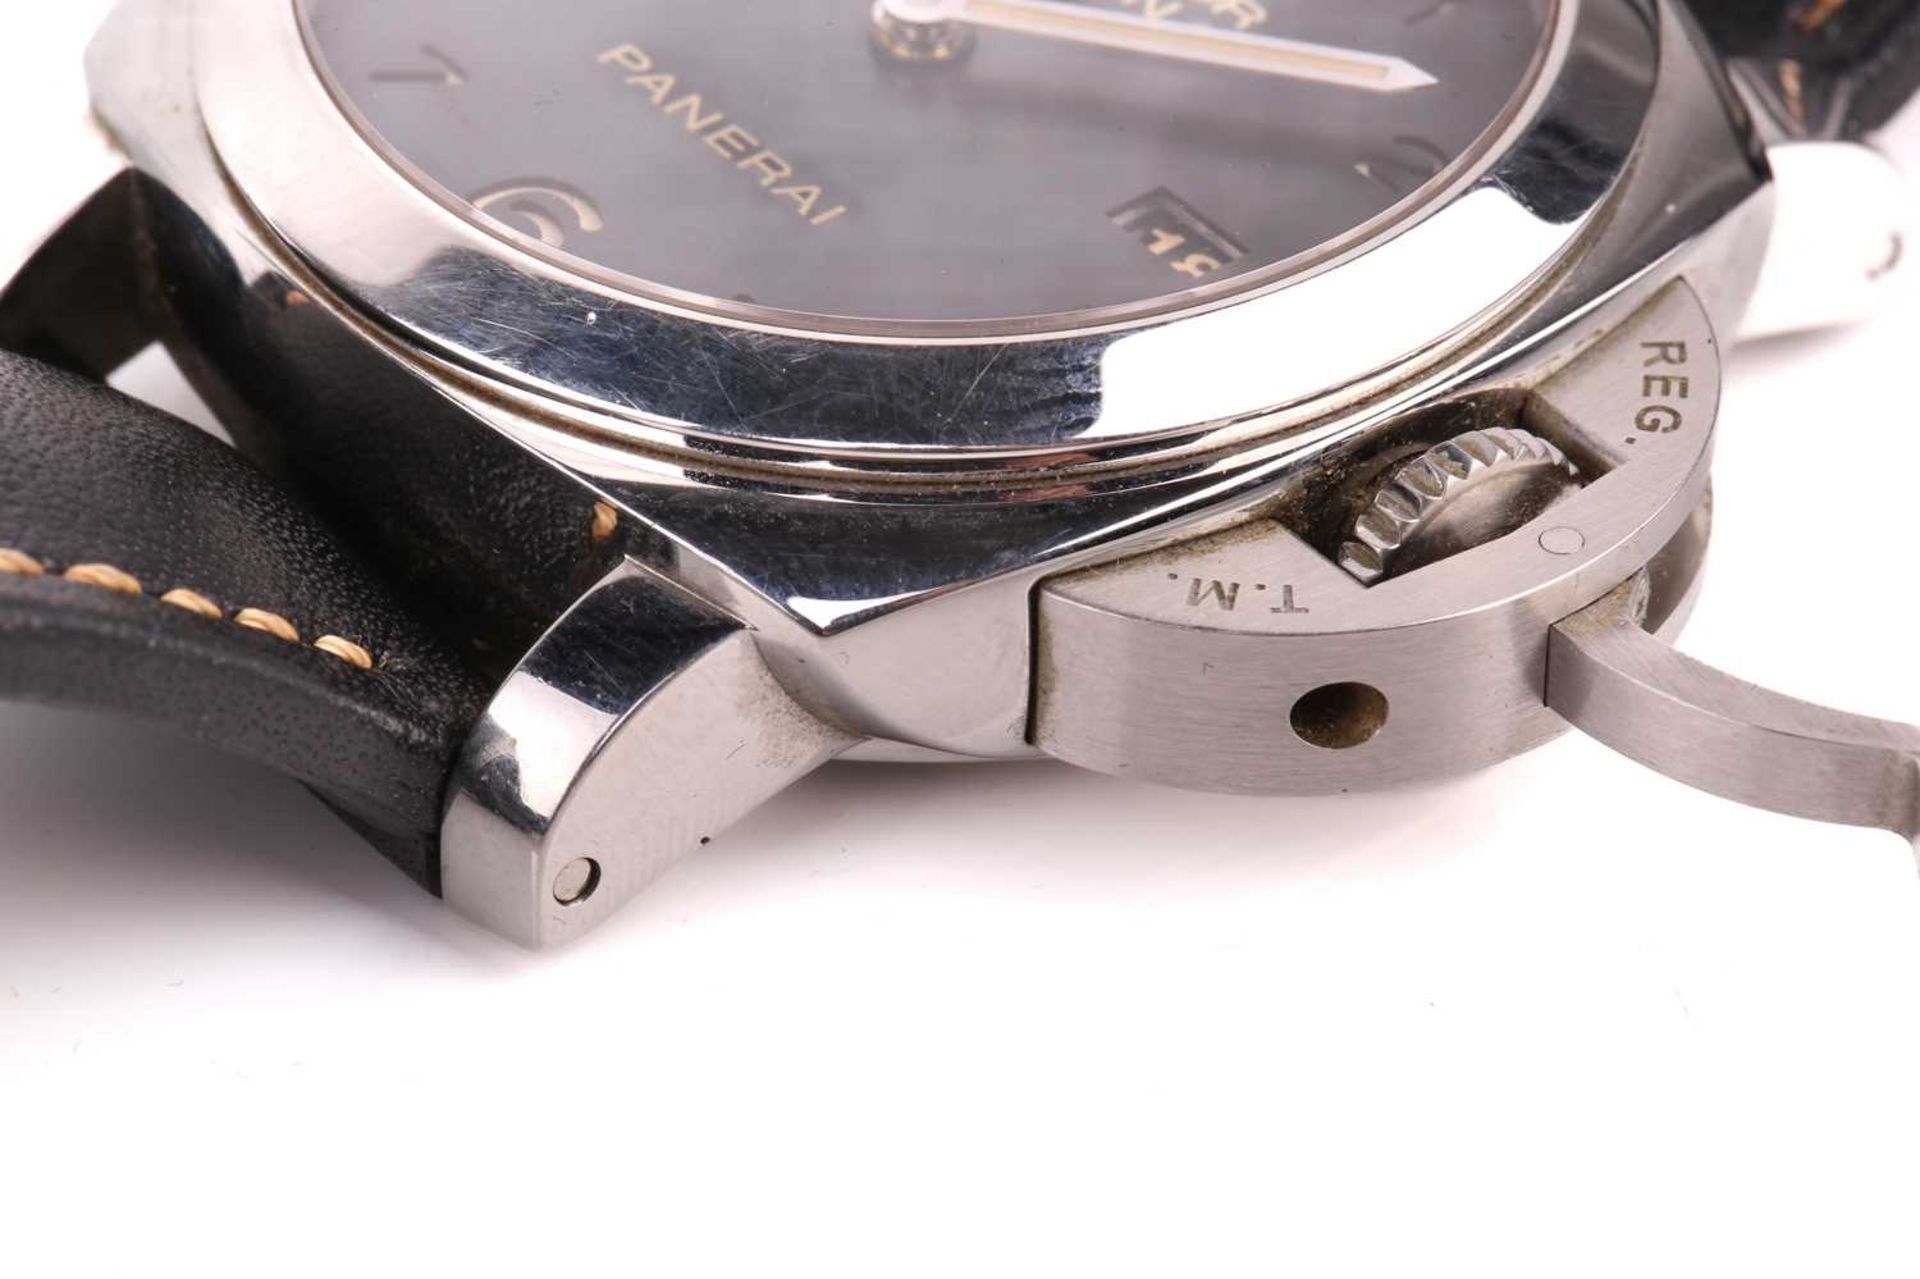 A Panerai Luminor Marina Ref: PAM00359, featuring a Swiss-made automatic movement in a steel case - Image 11 of 25